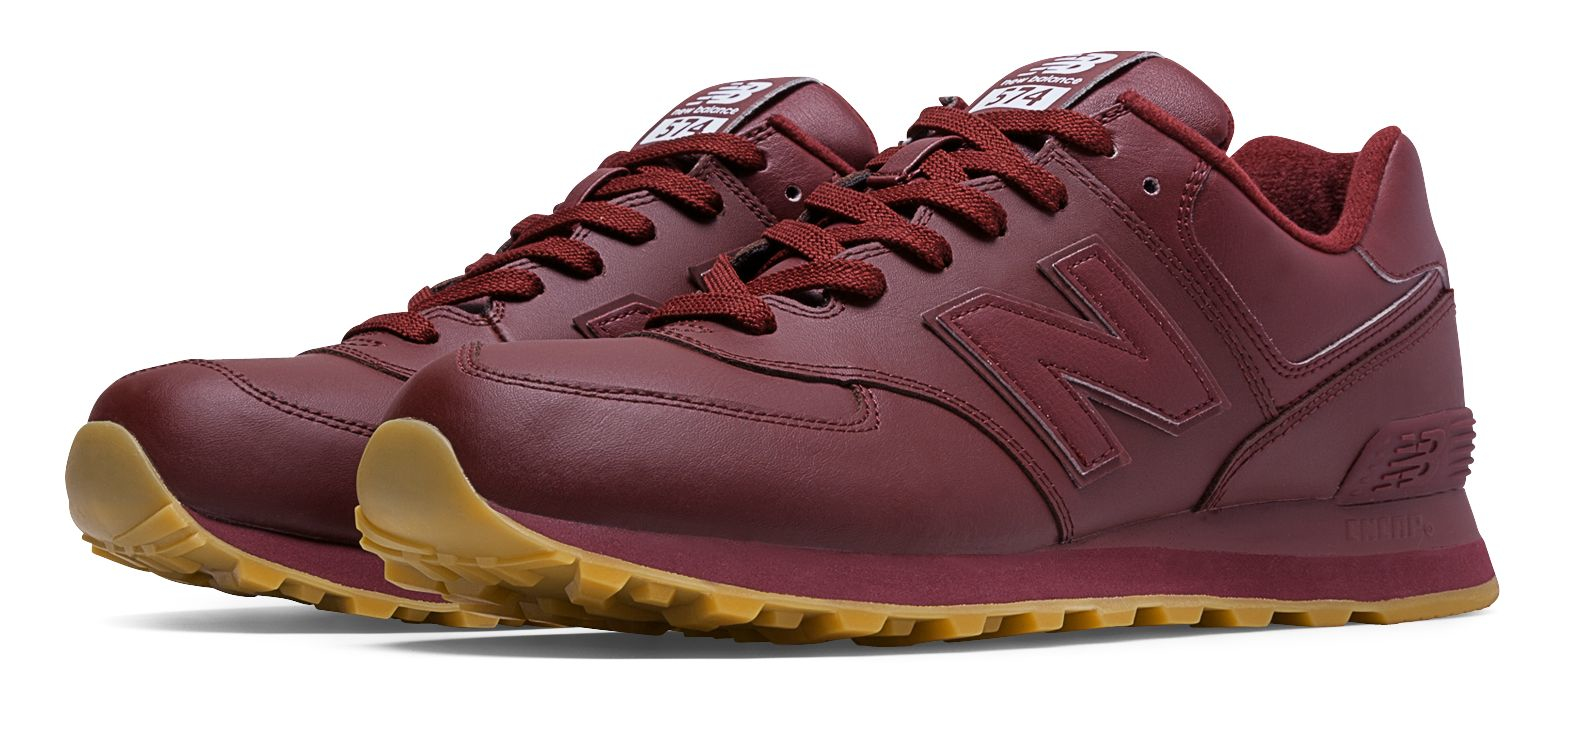 New Balance 574 Leather 574 Leather in Burgundy (Red) for Men - Lyst